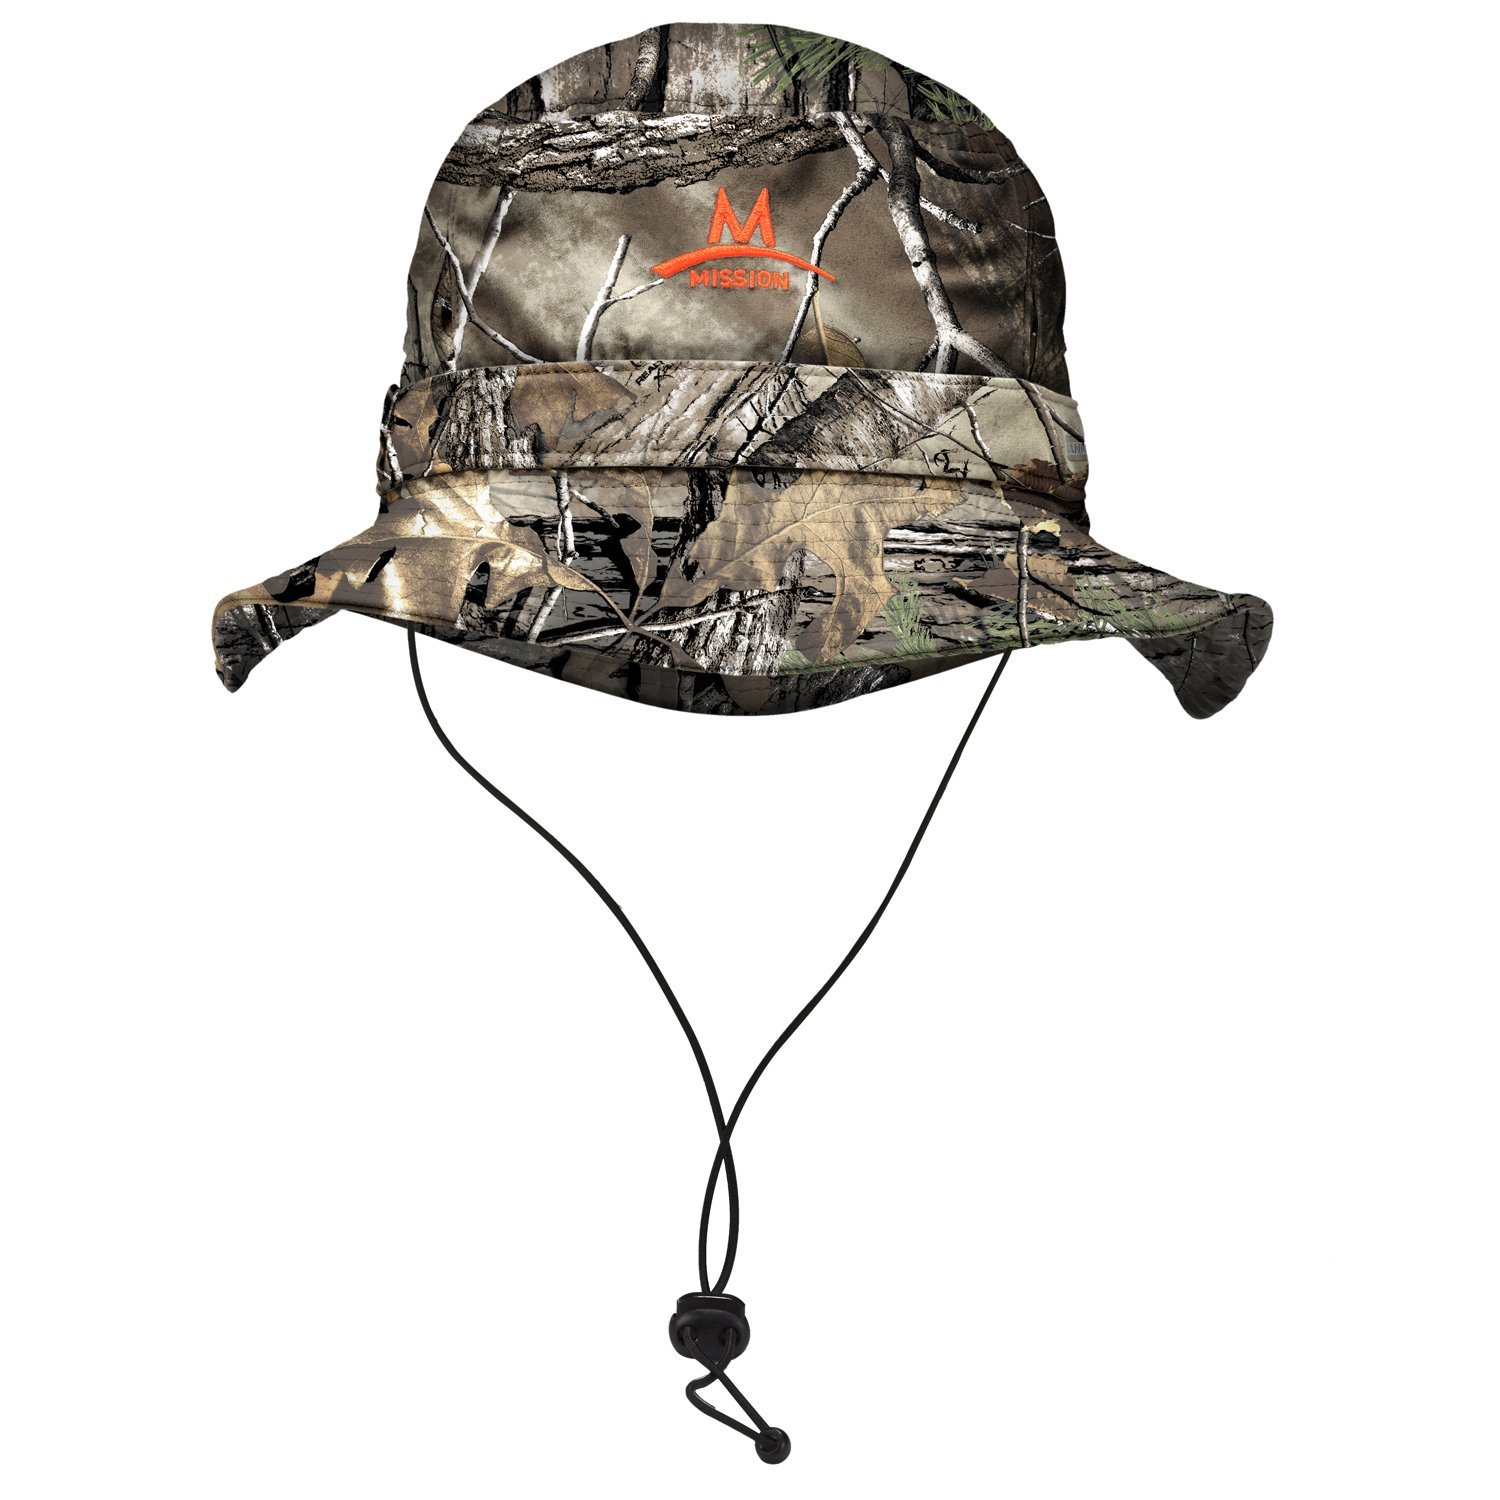 Mission Cooling Bucket Hat RealTree Camo UPF 50 One Size Men or Women